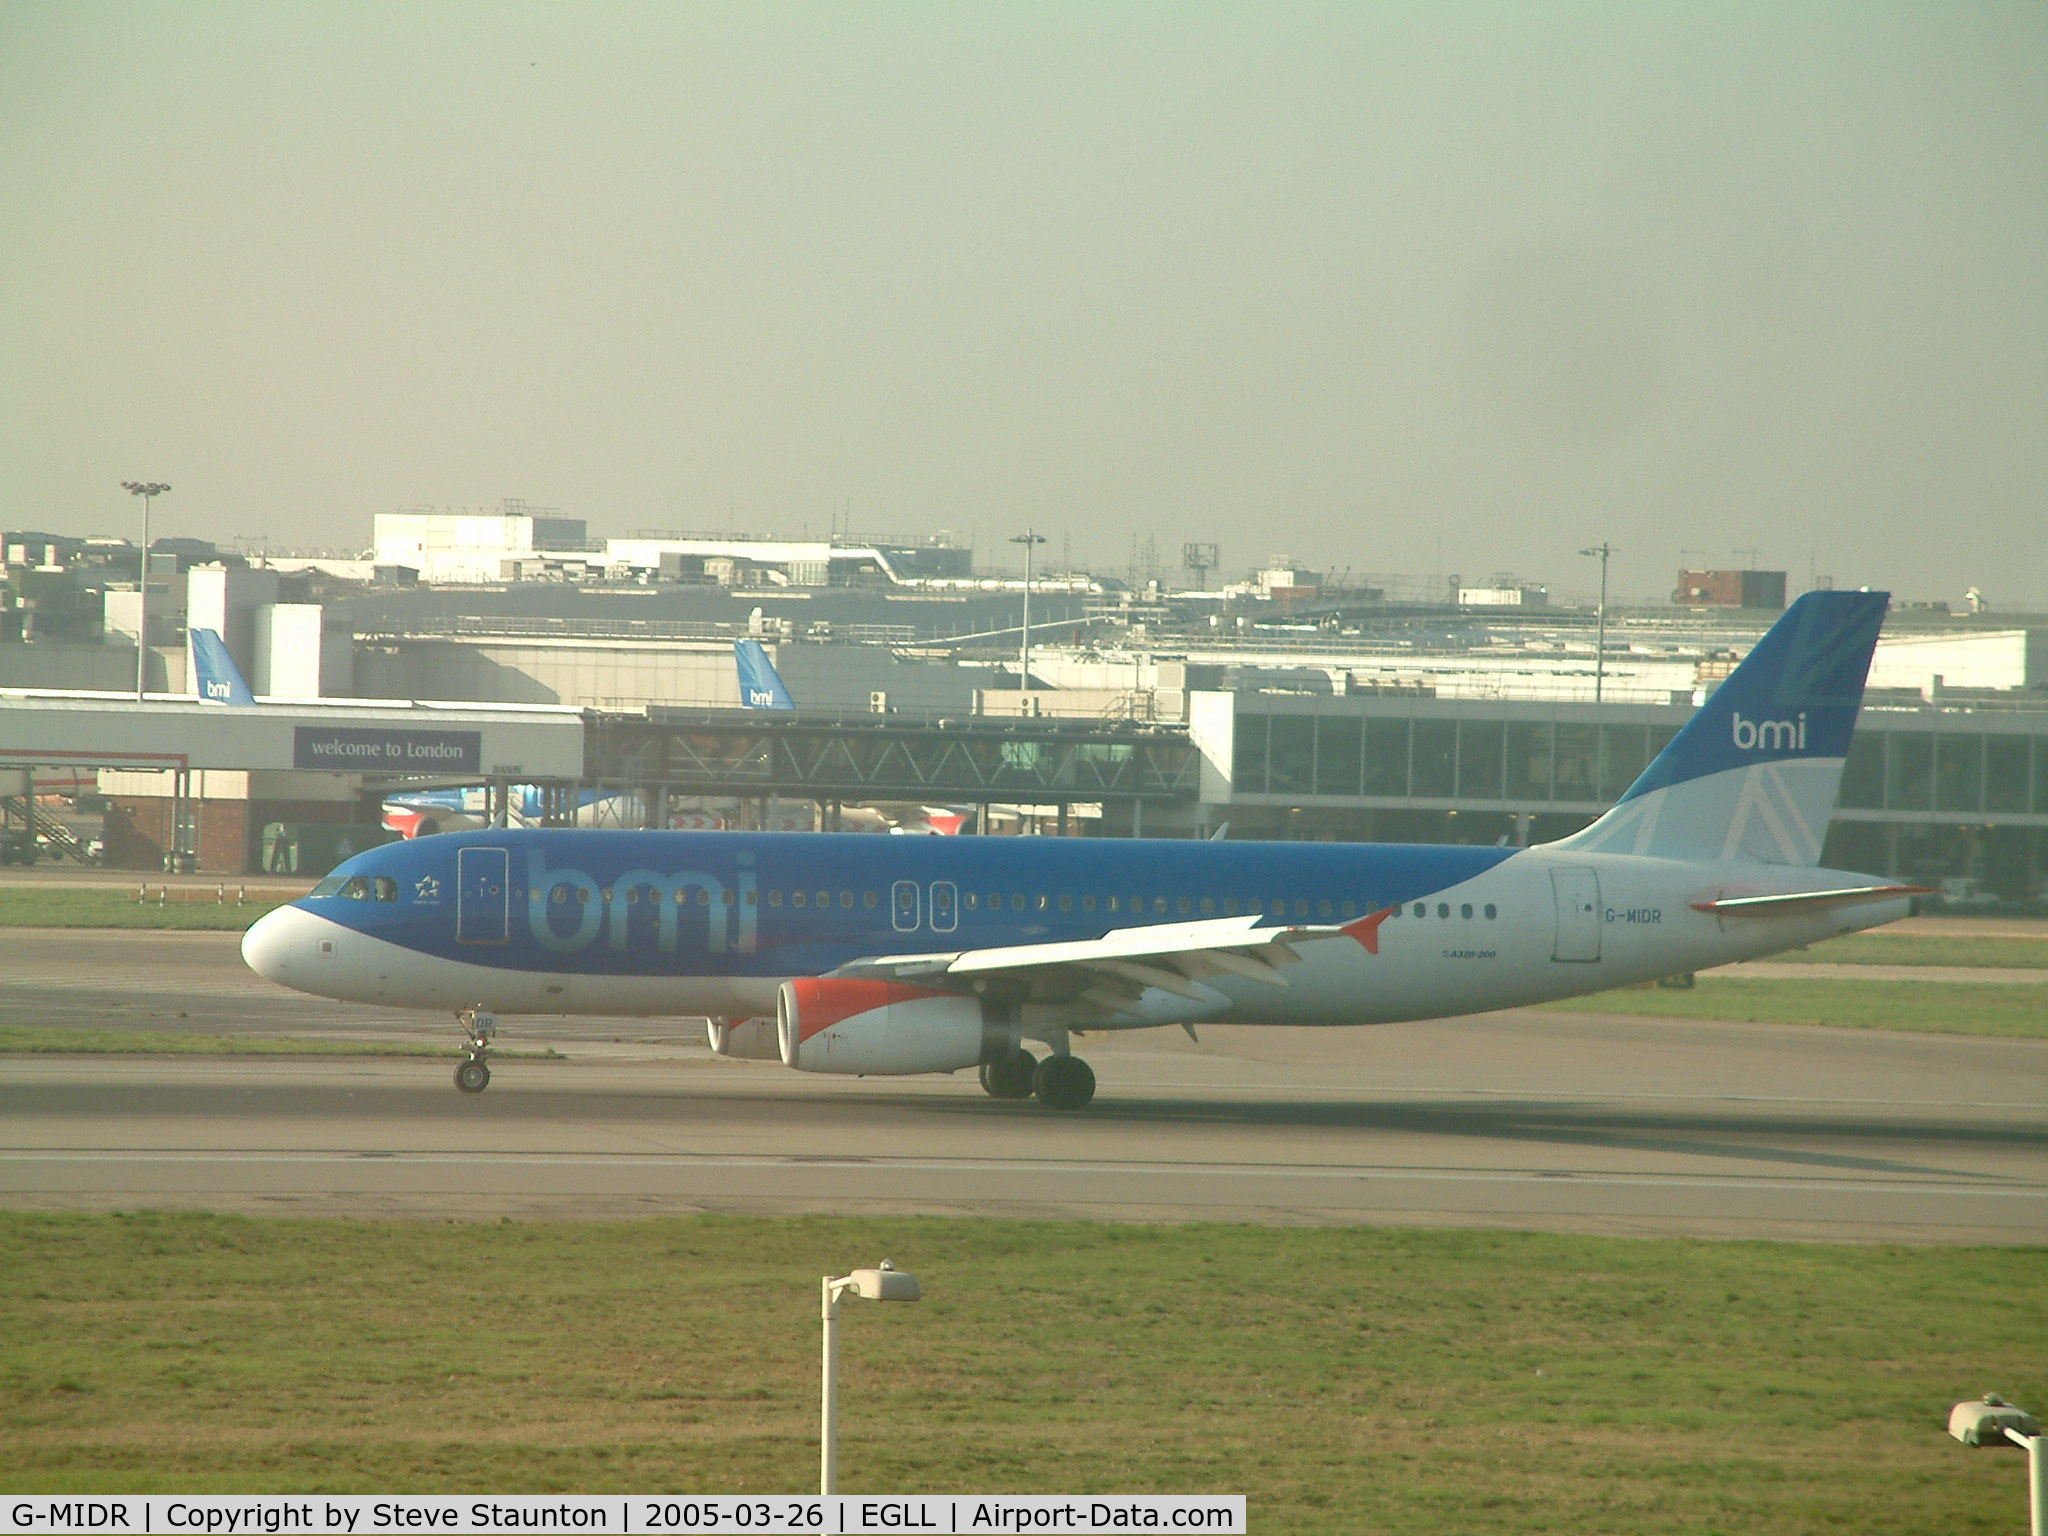 G-MIDR, 2002 Airbus A320-232 C/N 1697, Taken at Heathrow Airport March 2005